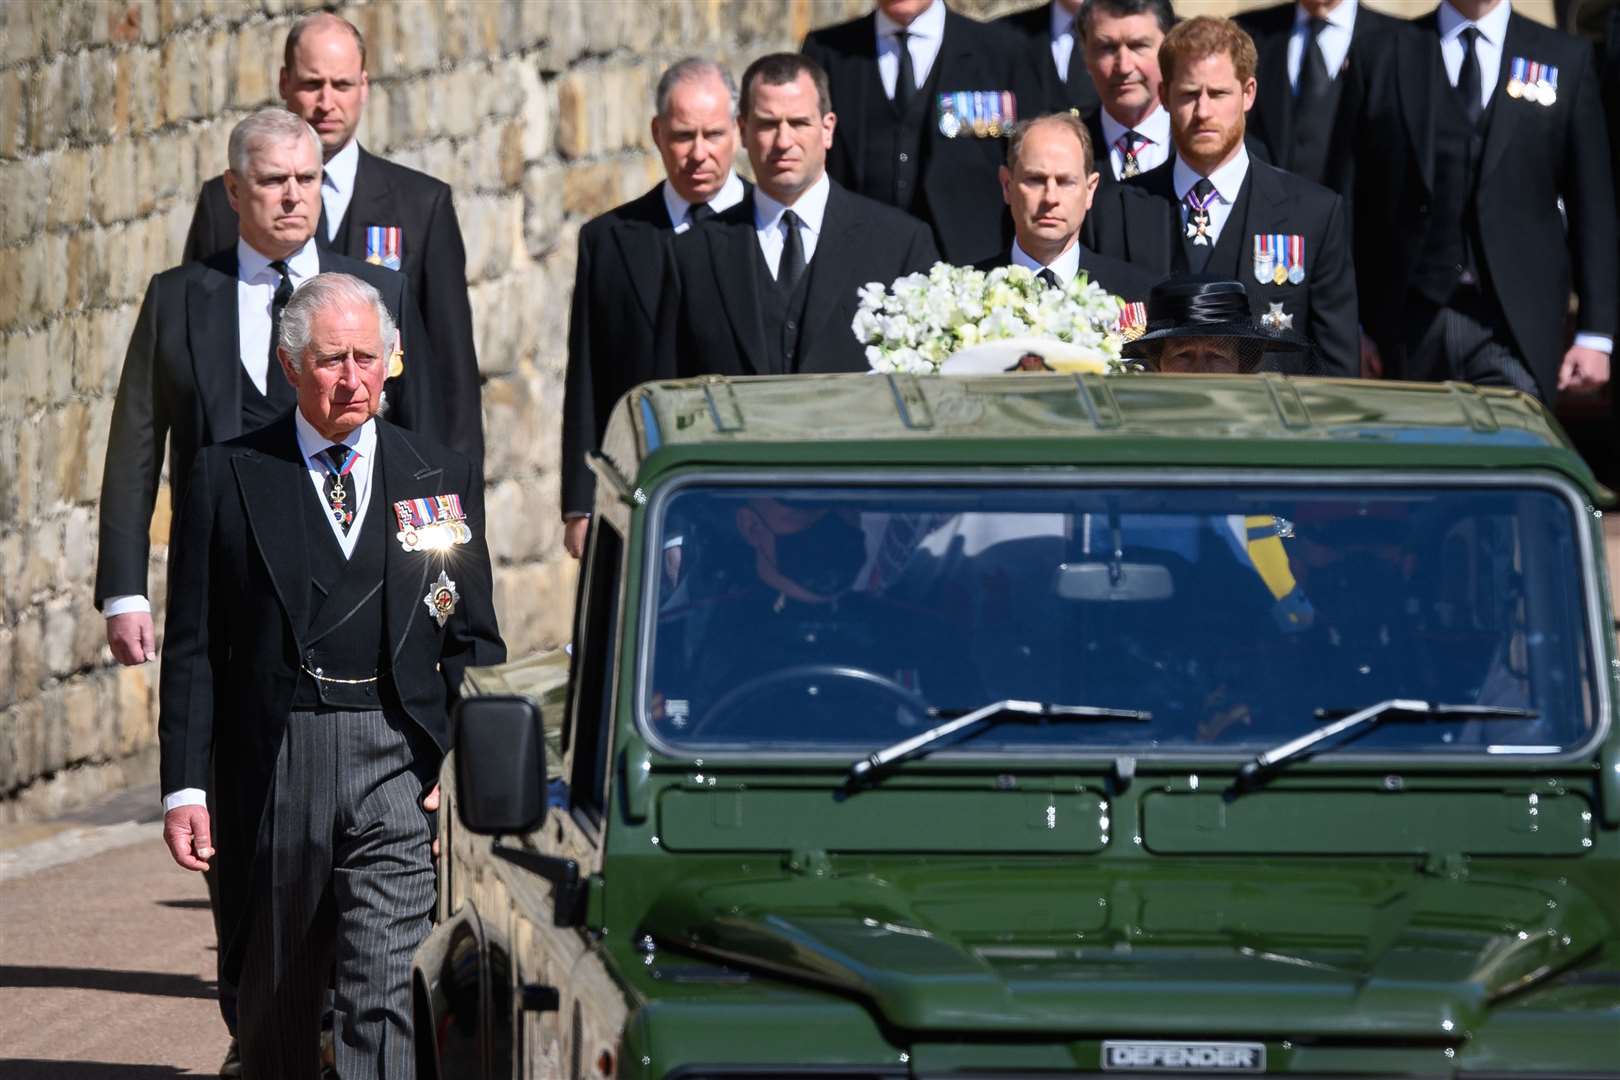 The Duke of Sussex (far right) following the Land Rover Defender carrying the coffin of the Duke of Edinburgh in April 2021 (Leon Neal/PA)